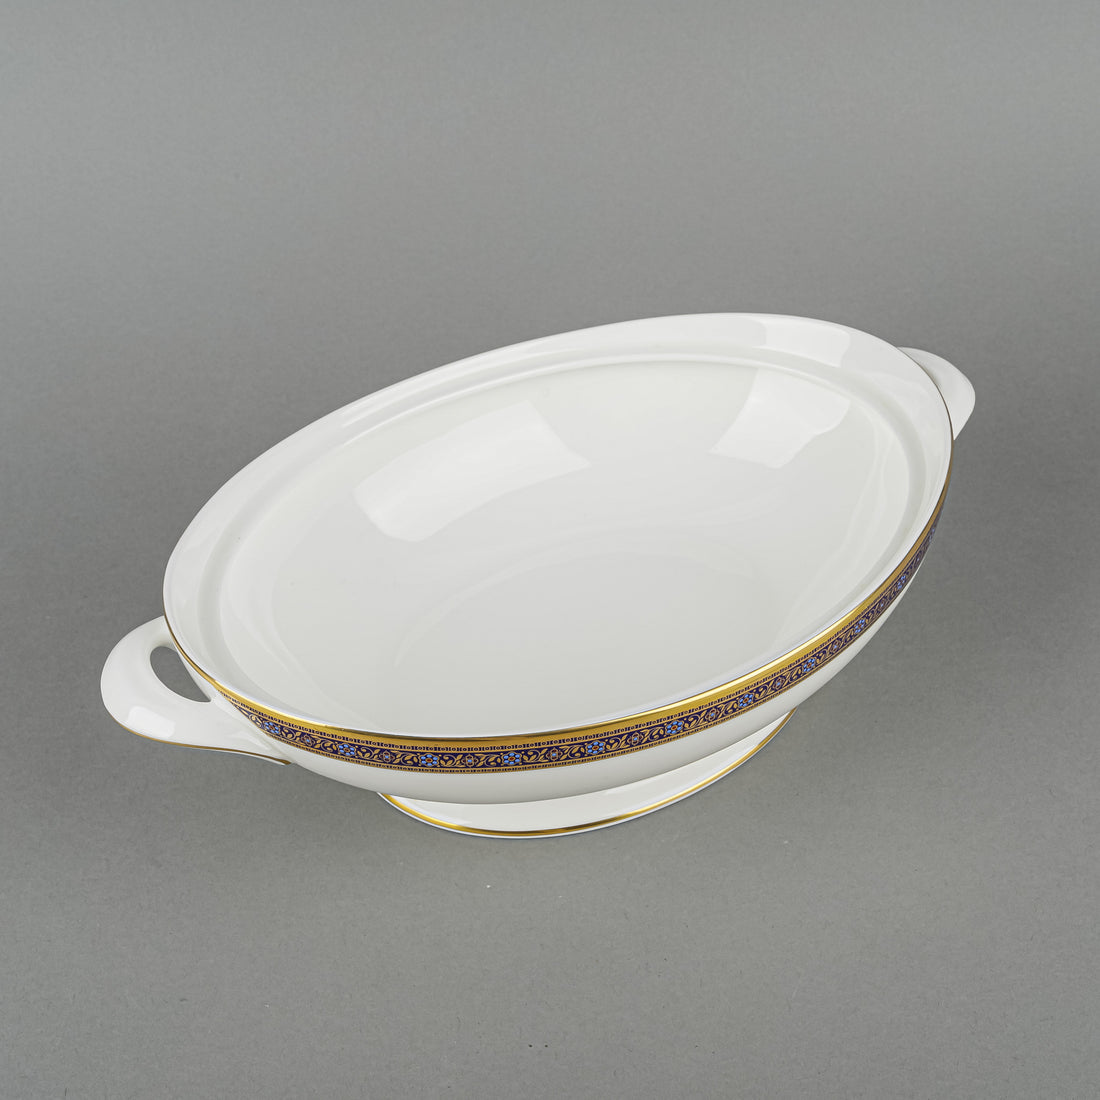 ROYAL DOULTON Harlow H.5034 Oval Covered Serving Dish